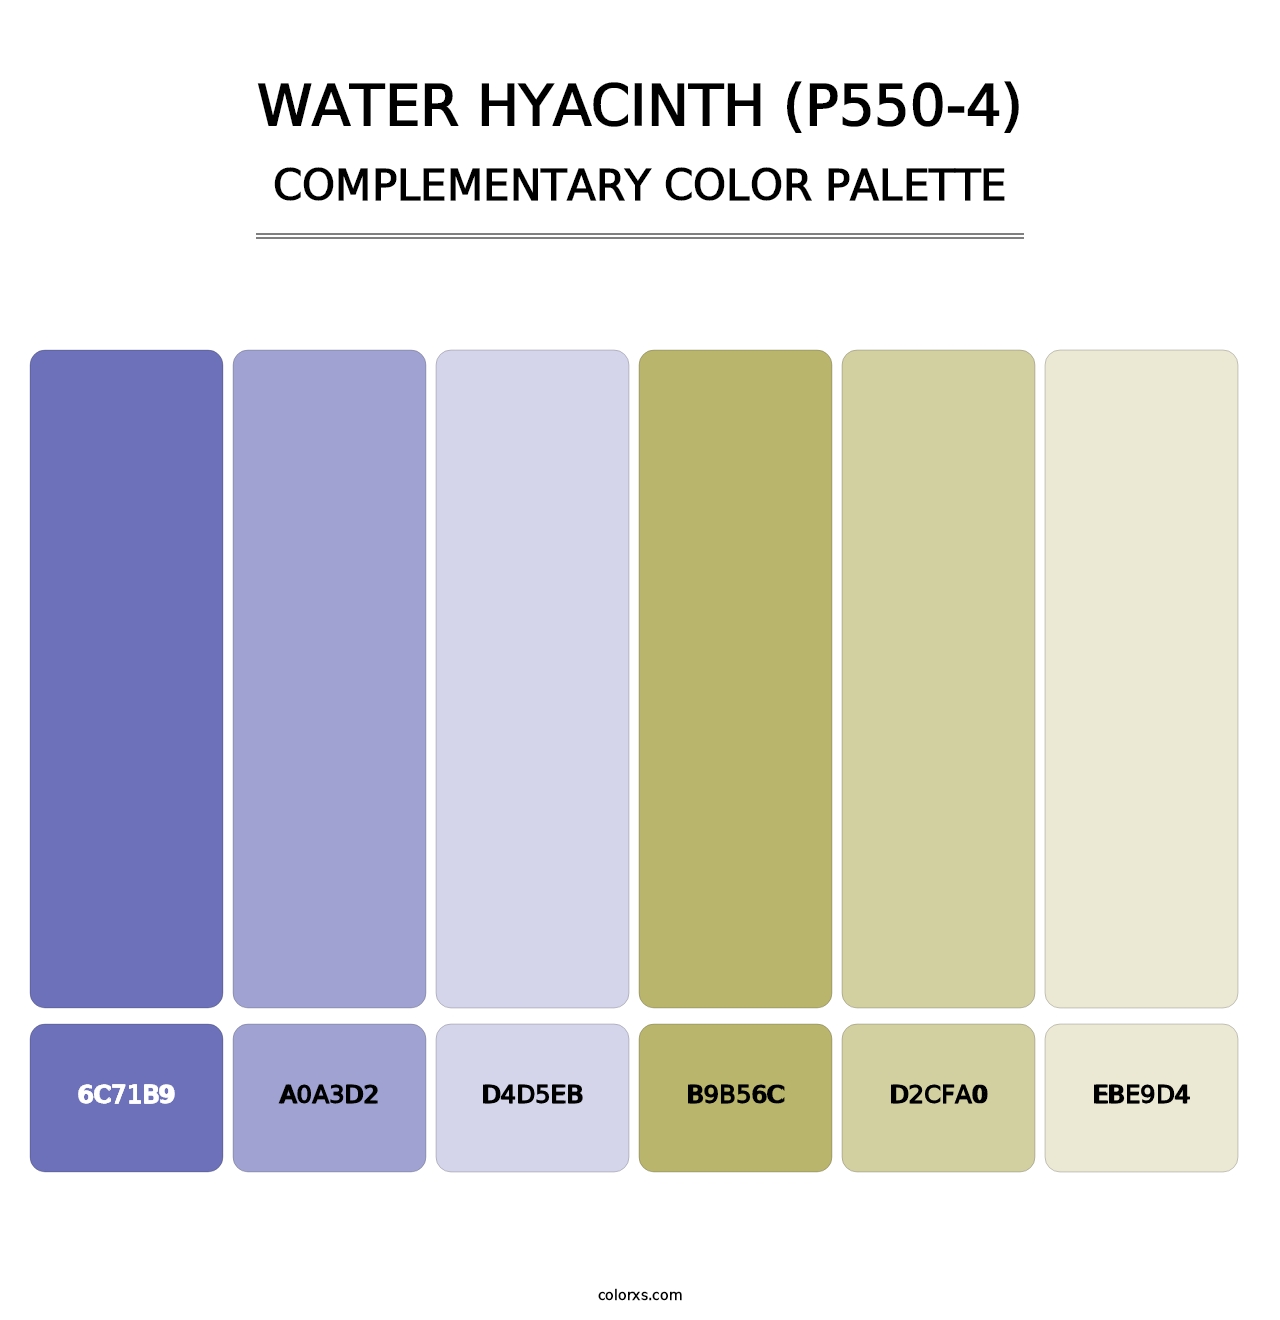 Water Hyacinth (P550-4) - Complementary Color Palette